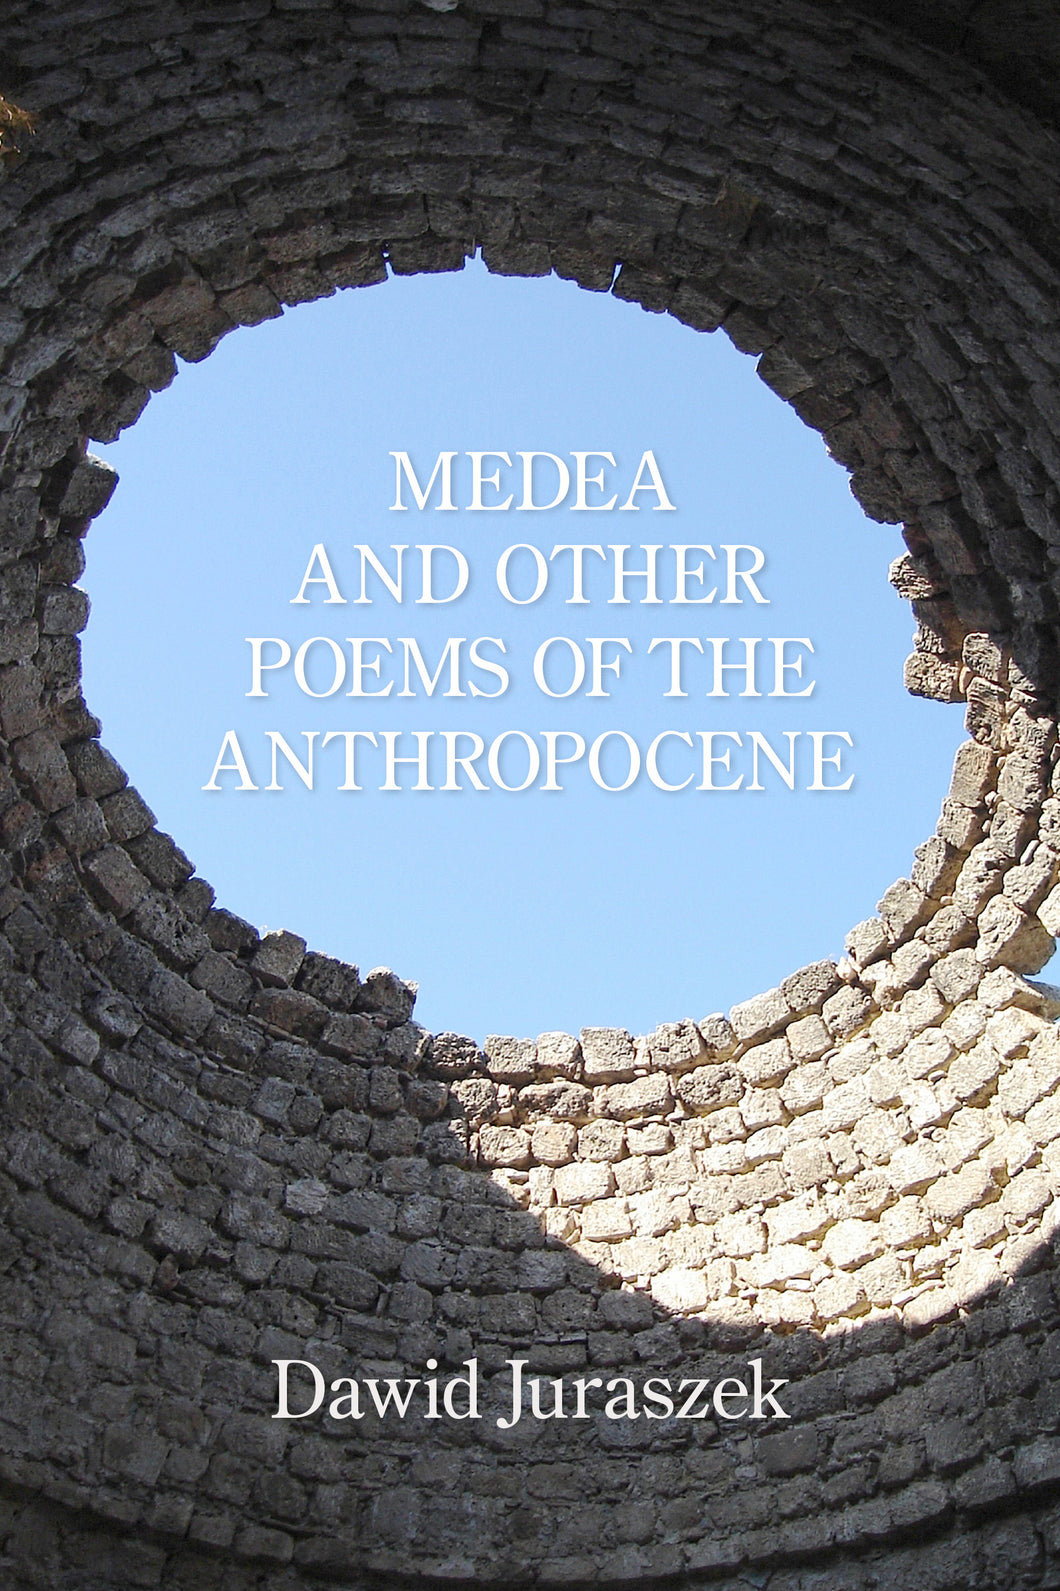 Medea and Other Poems of the Anthropocene